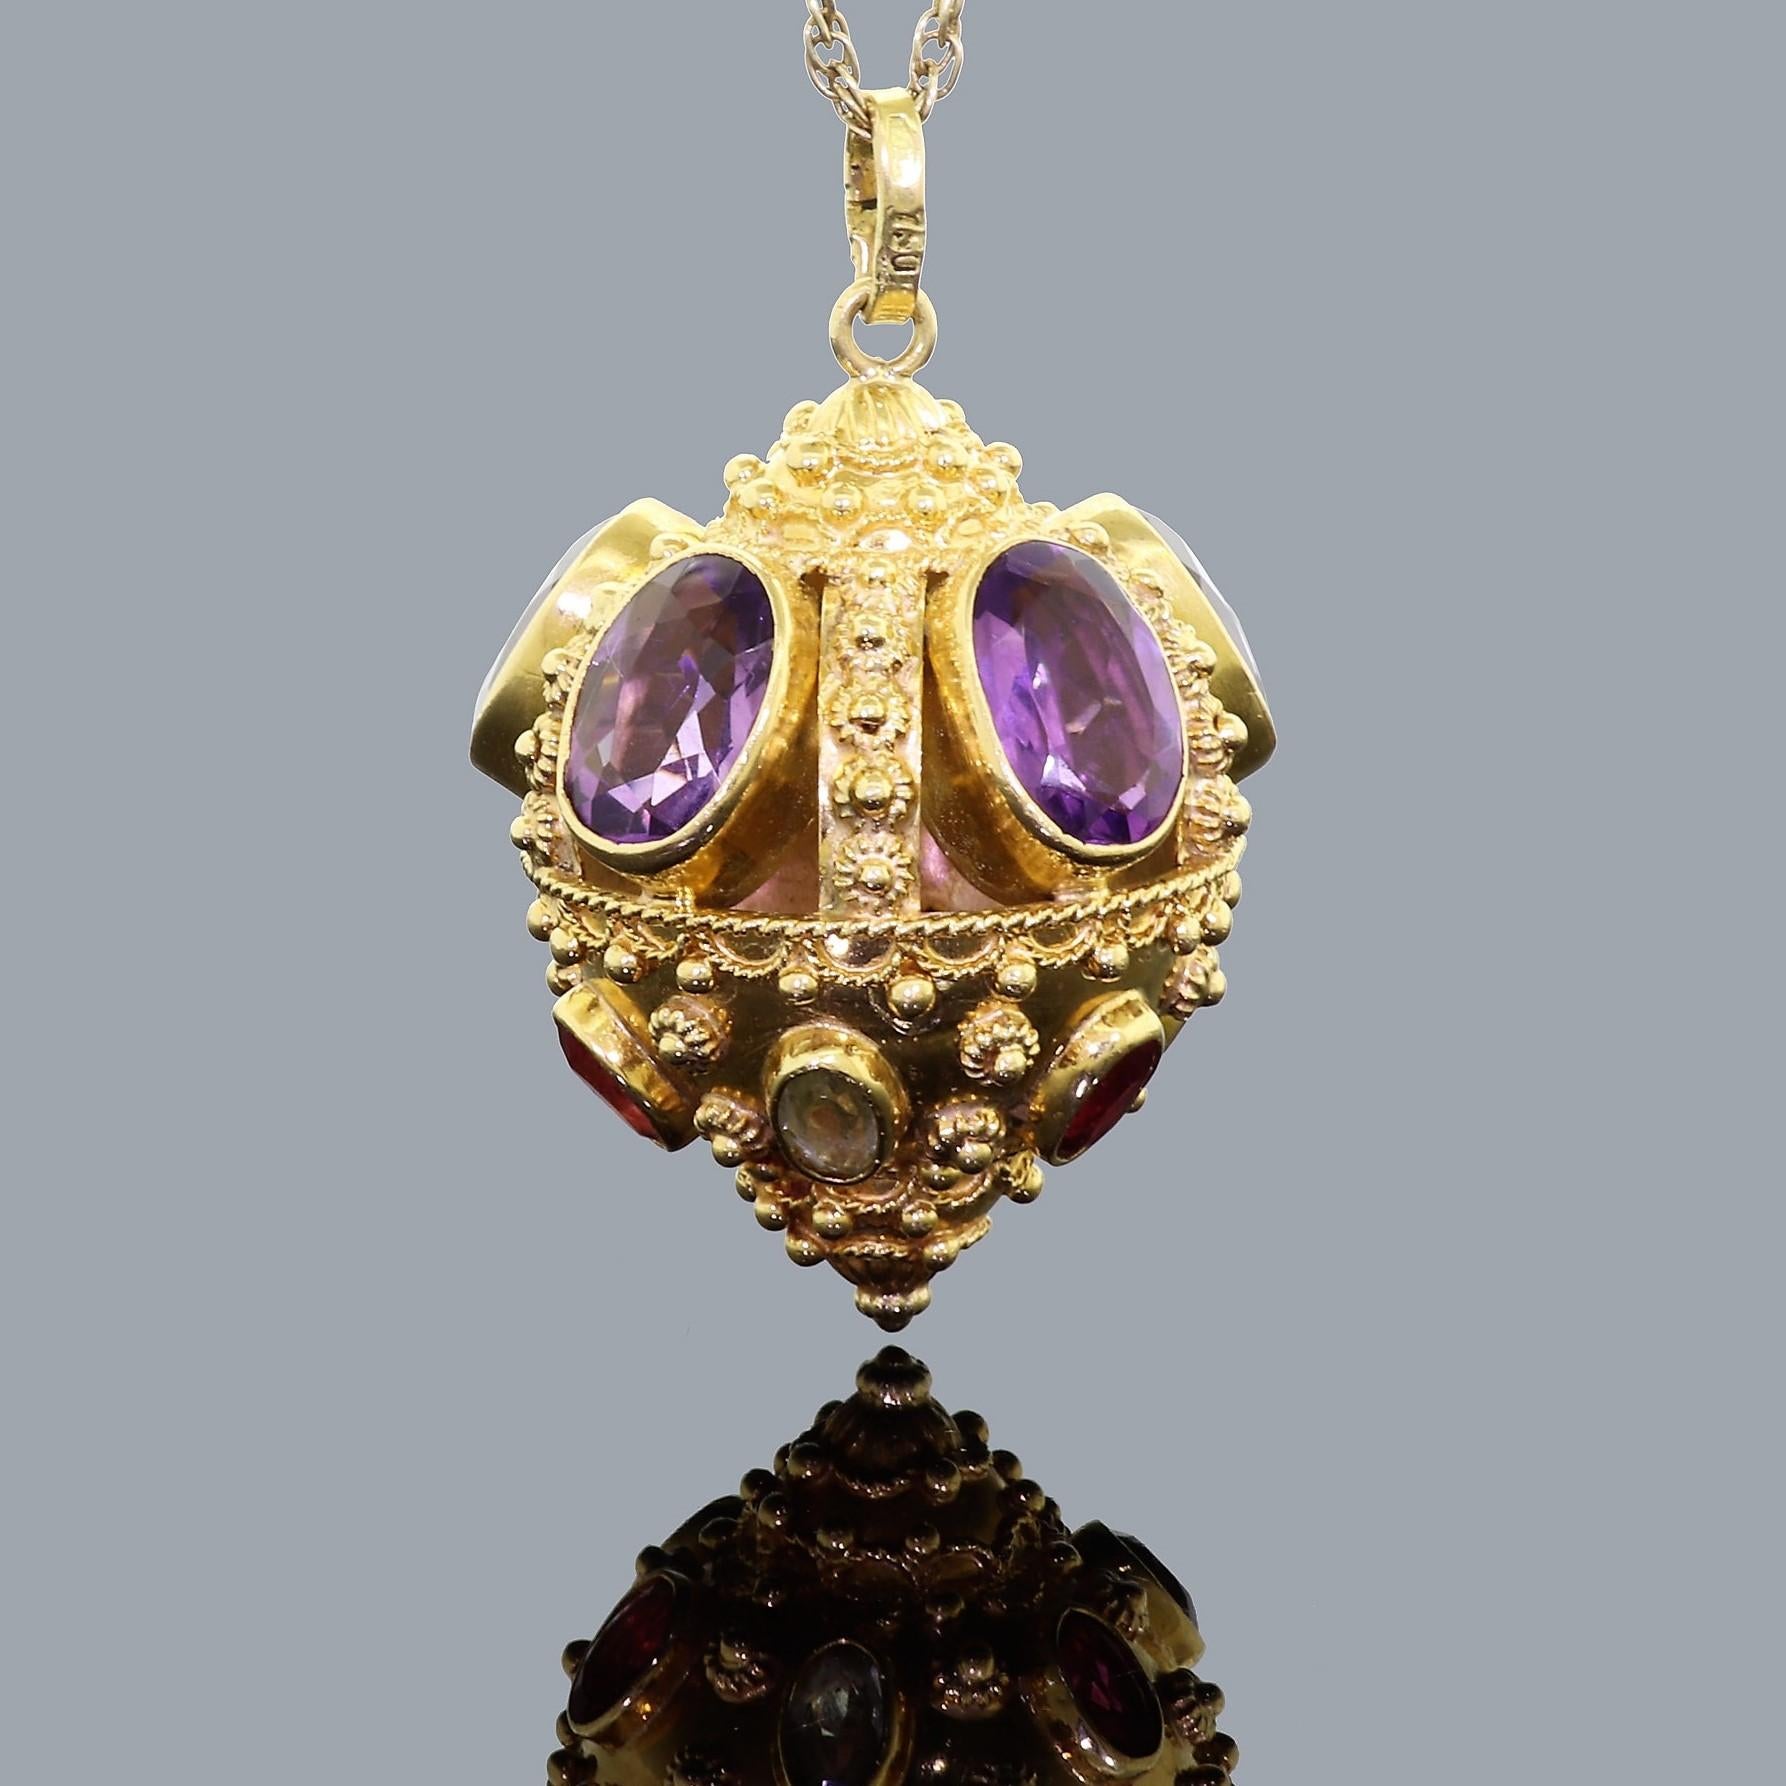 Women's Contanessi Alessandro 18K Gold Etruscan Style Amethyst Fob Charm Pendant 24.8 Gr